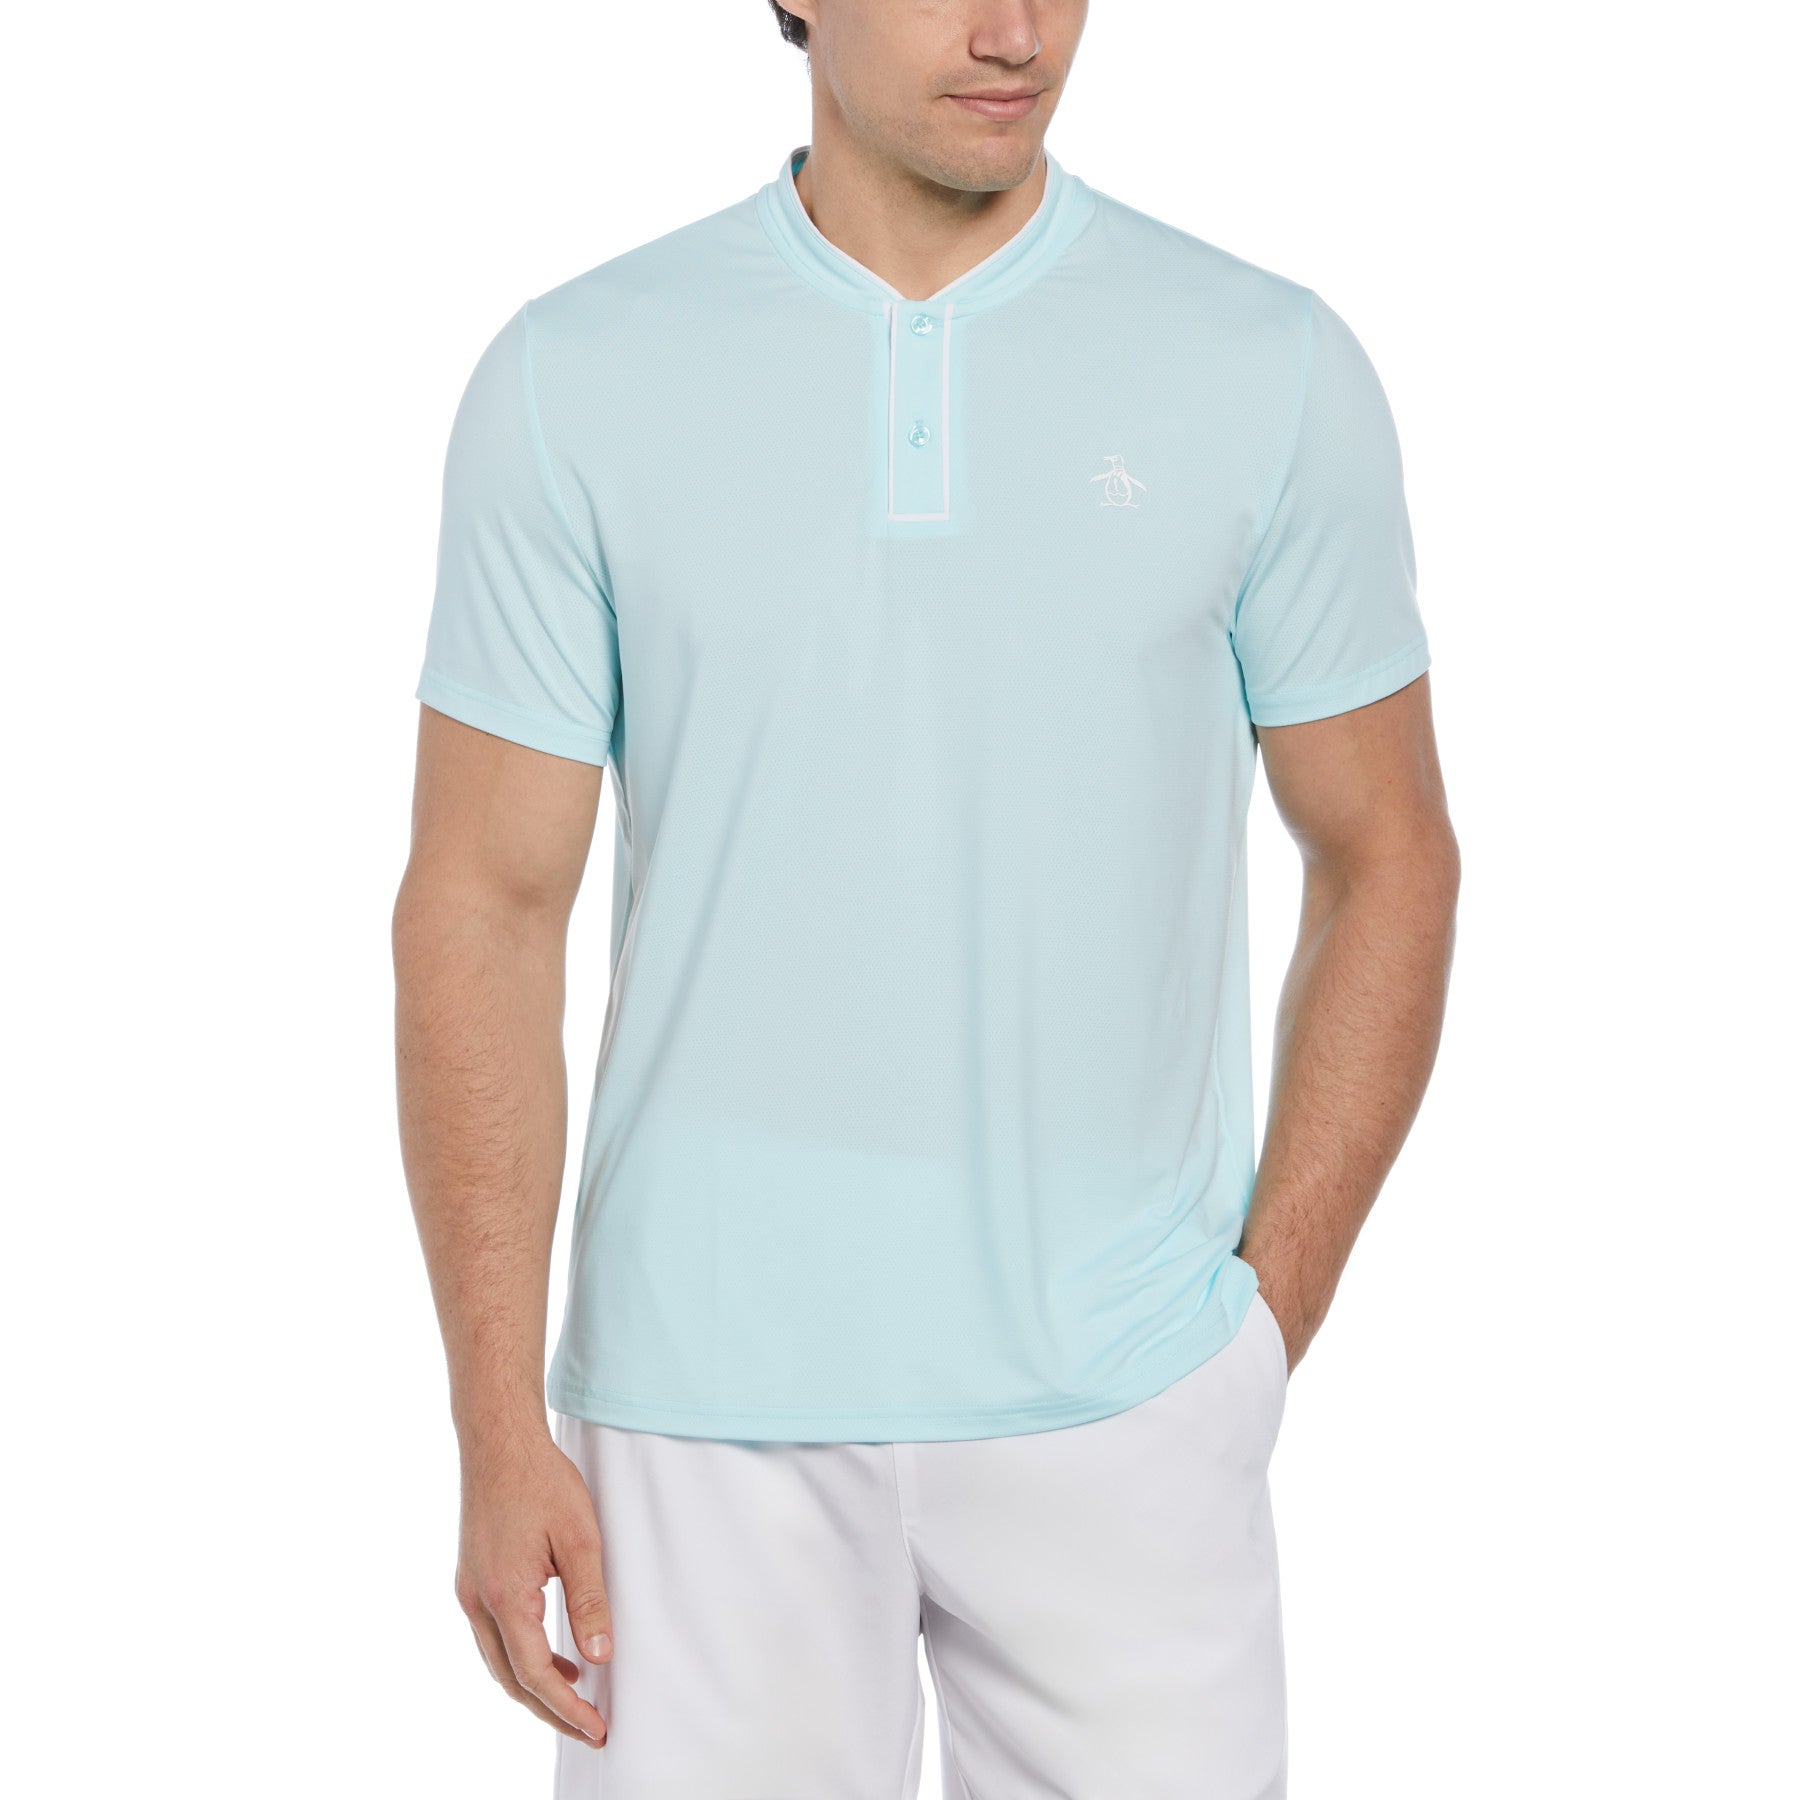 View Piped Blade Collar Performance Short Sleeve Tennis Polo Shirt In Tanag information